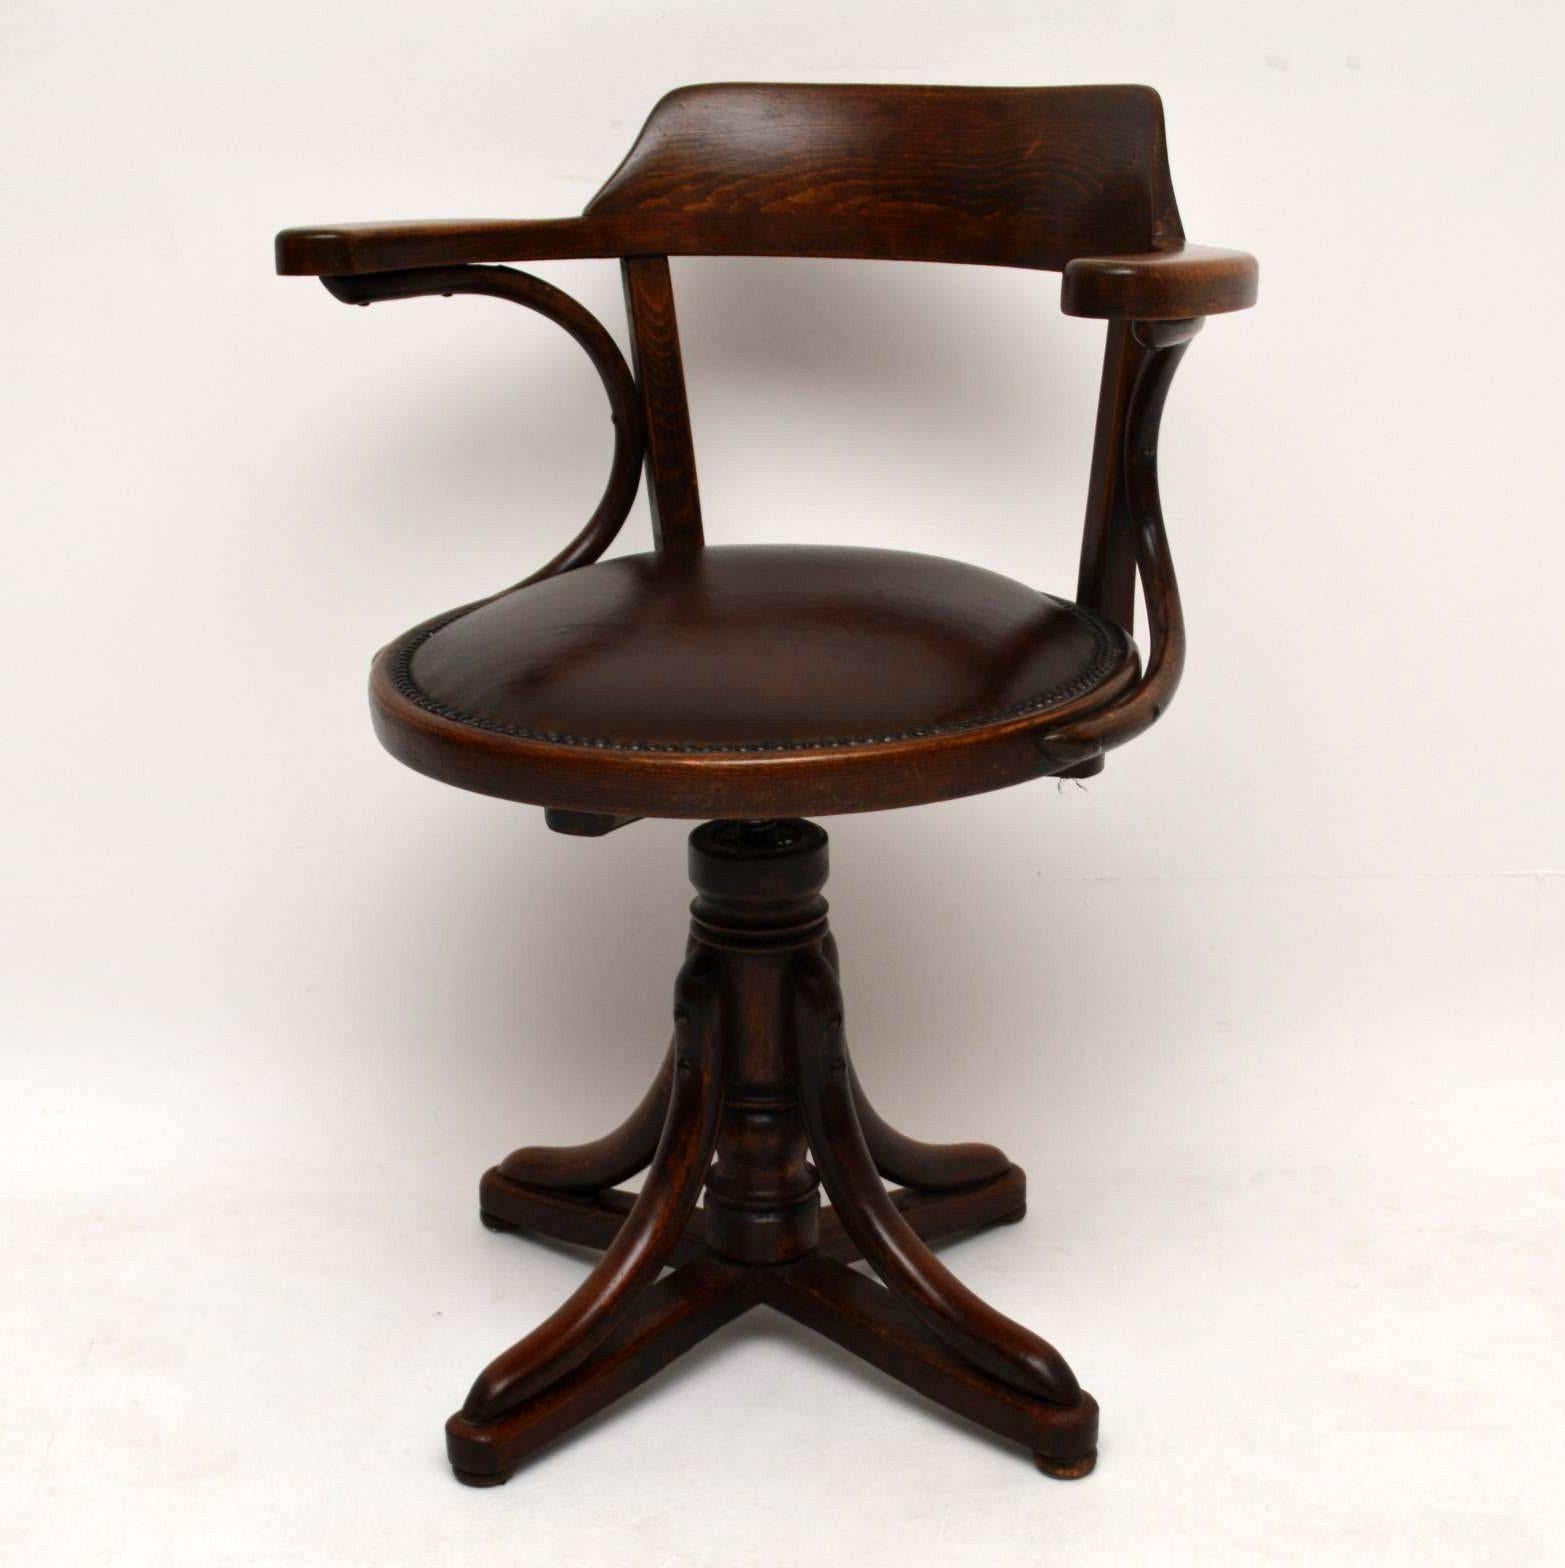 Antique Thonet bentwood revolving desk chair in good original condition, with an adjustable height mechanism. This is quite a rare item and a very nice example of this kind of thing. I believe this was made around the 1890-1910 period. We have just